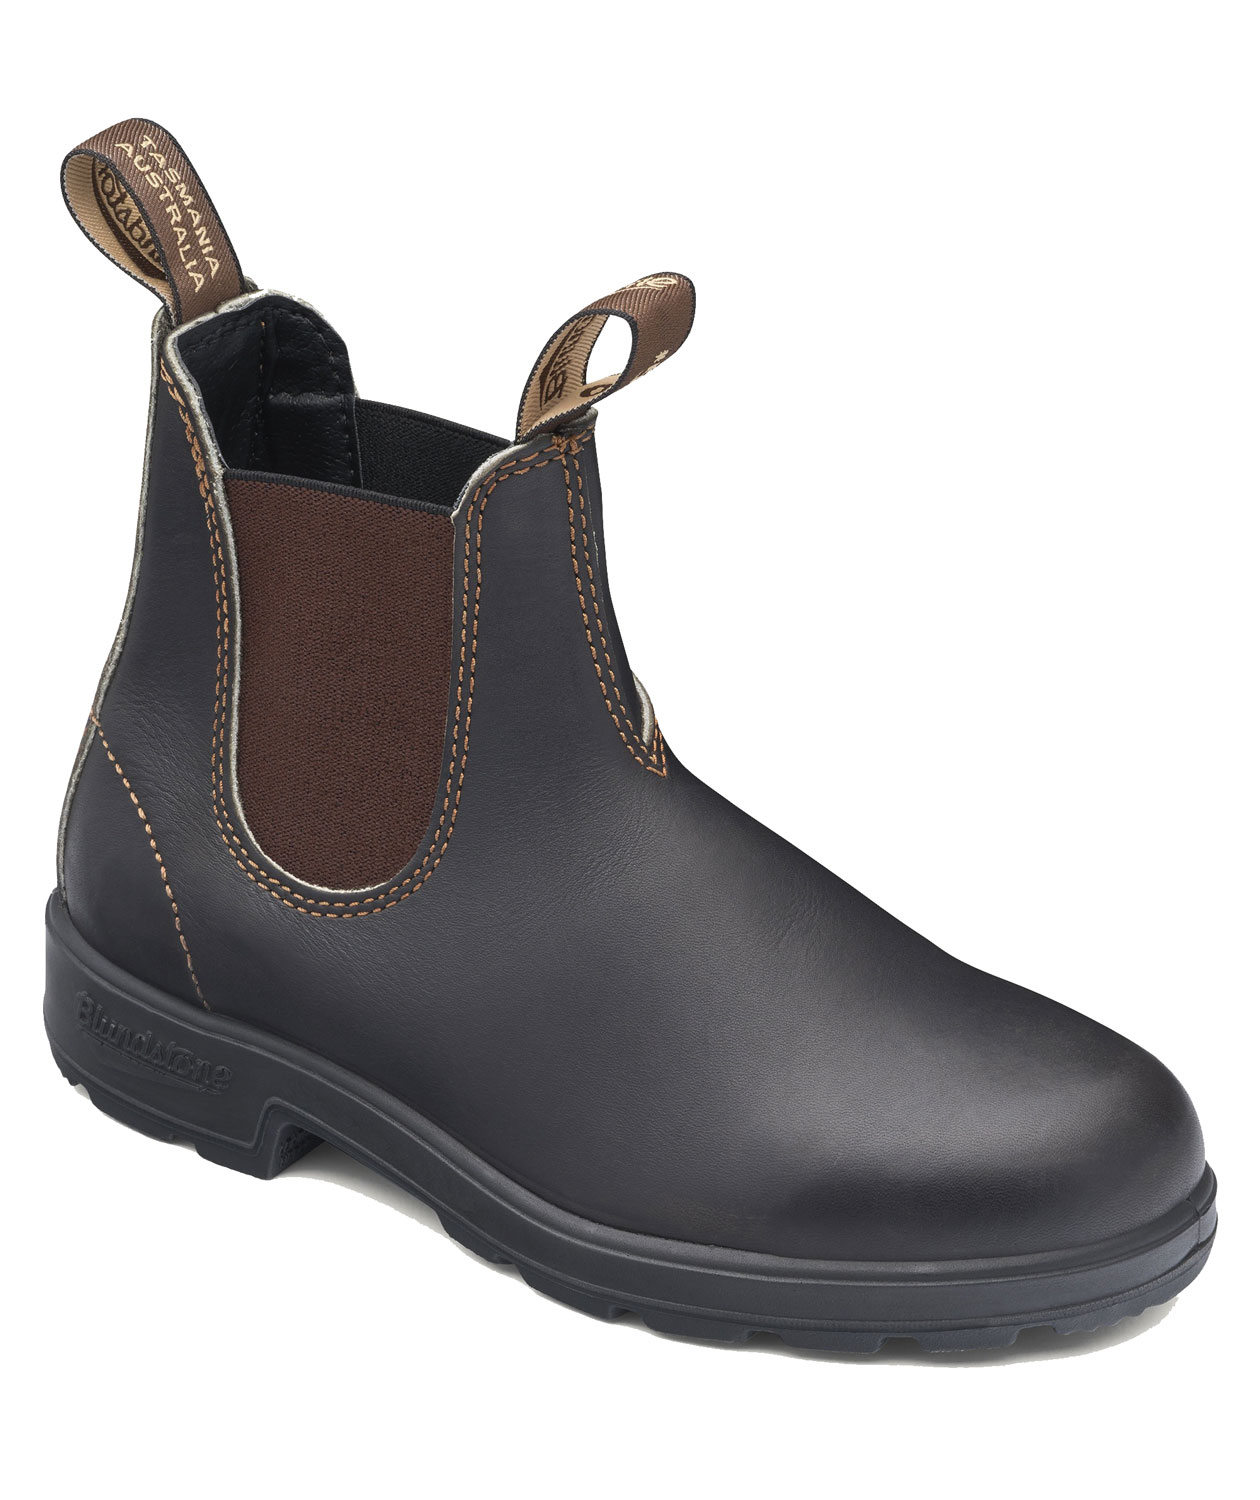 Buy Blundstone 500 boots at Cheap-workwear.com